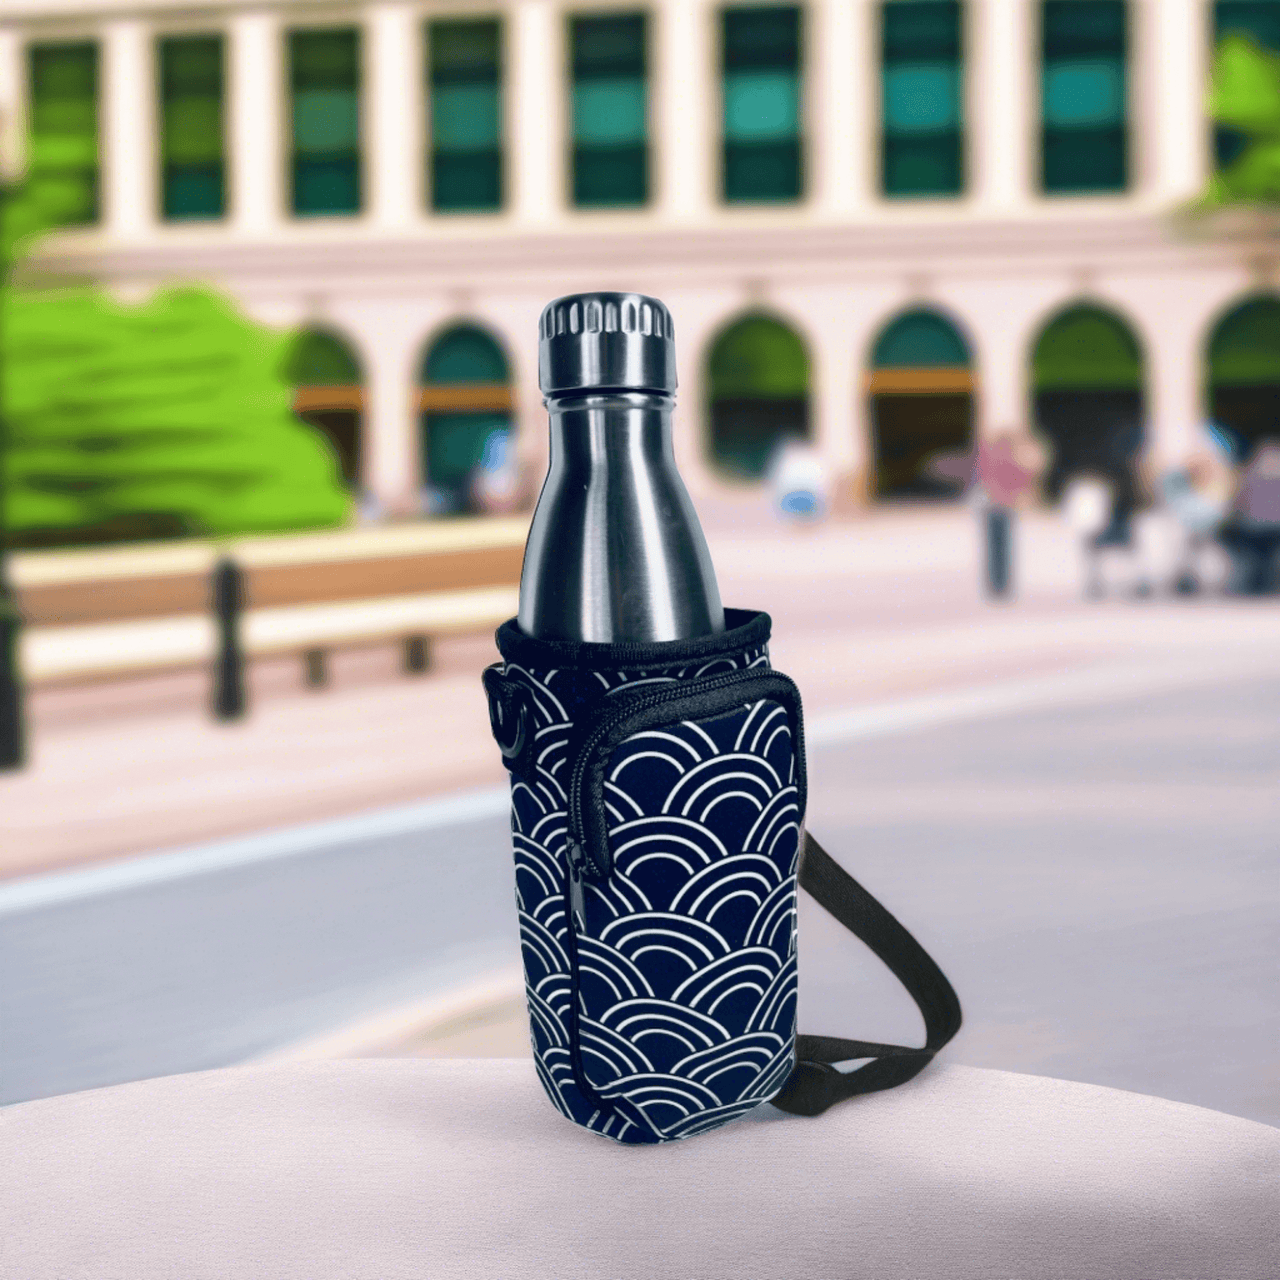 Stylish insulated water bottle and phone pouch with geometric pattern, perfect for on-the-go convenience and style.